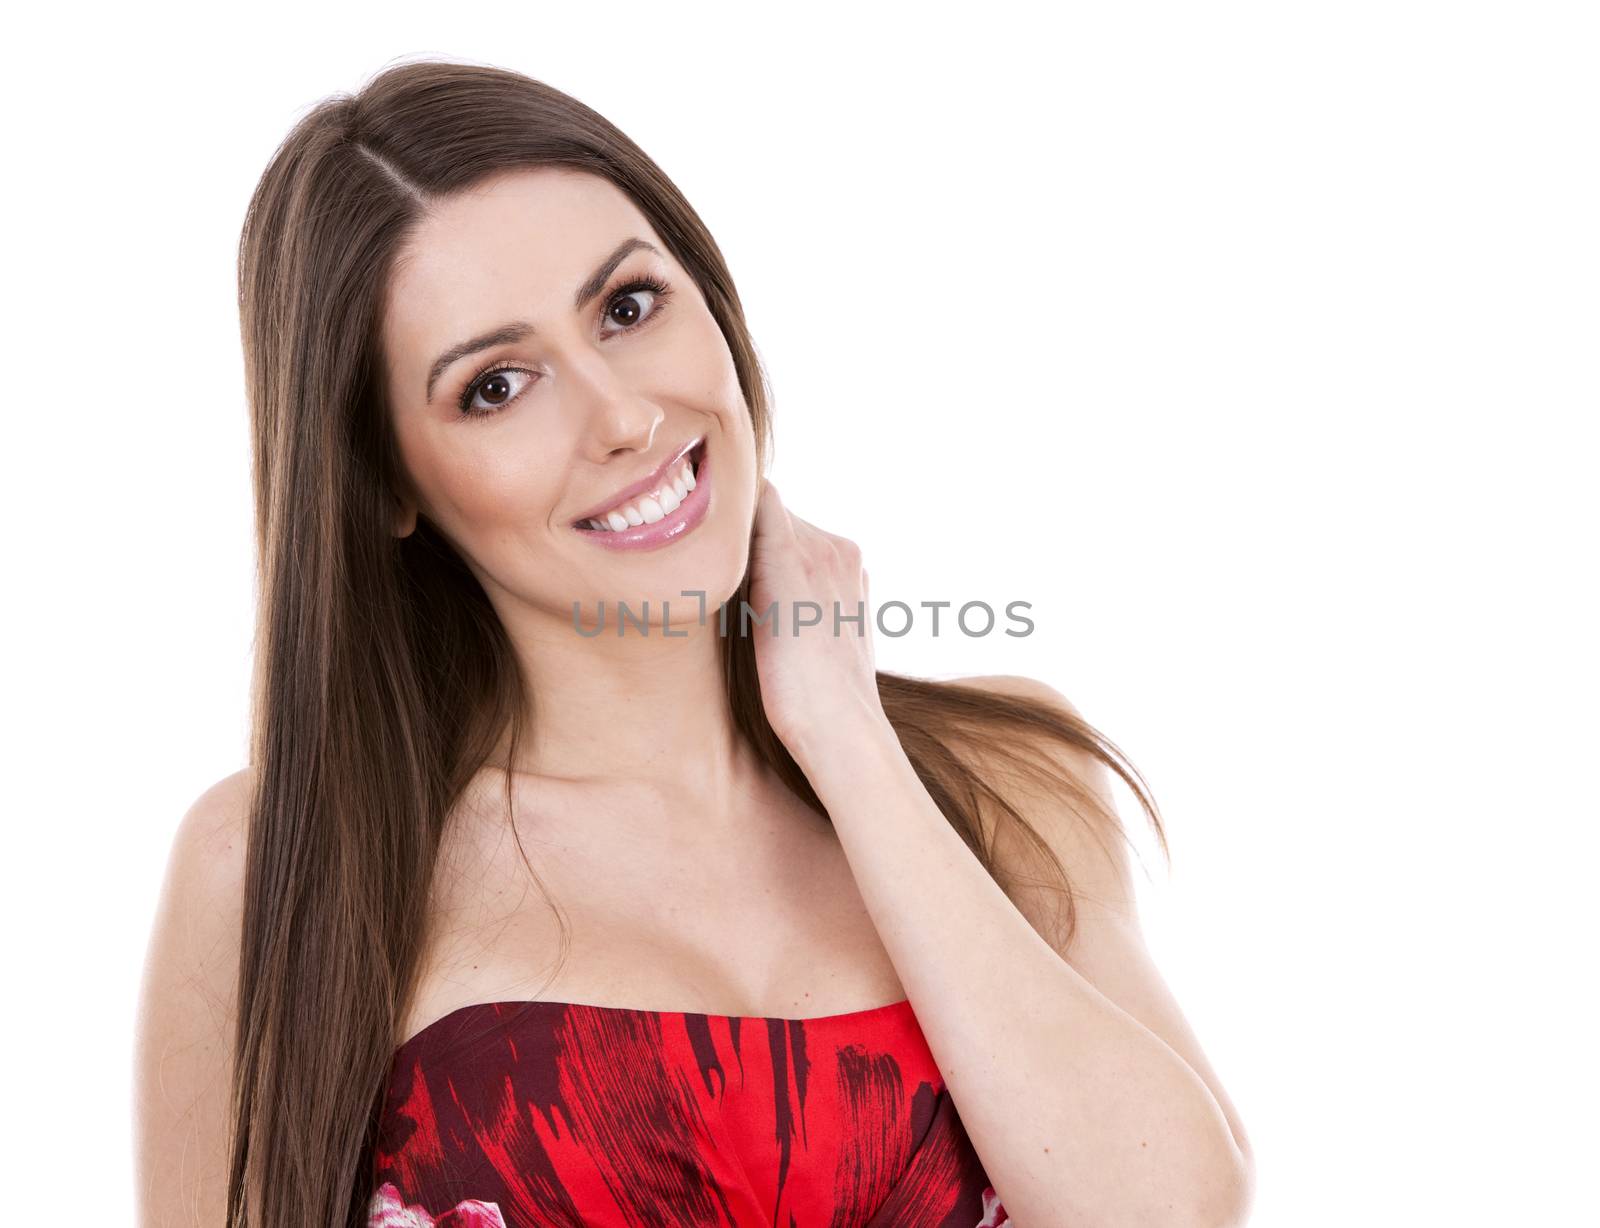 young woman wearing red dress on white background